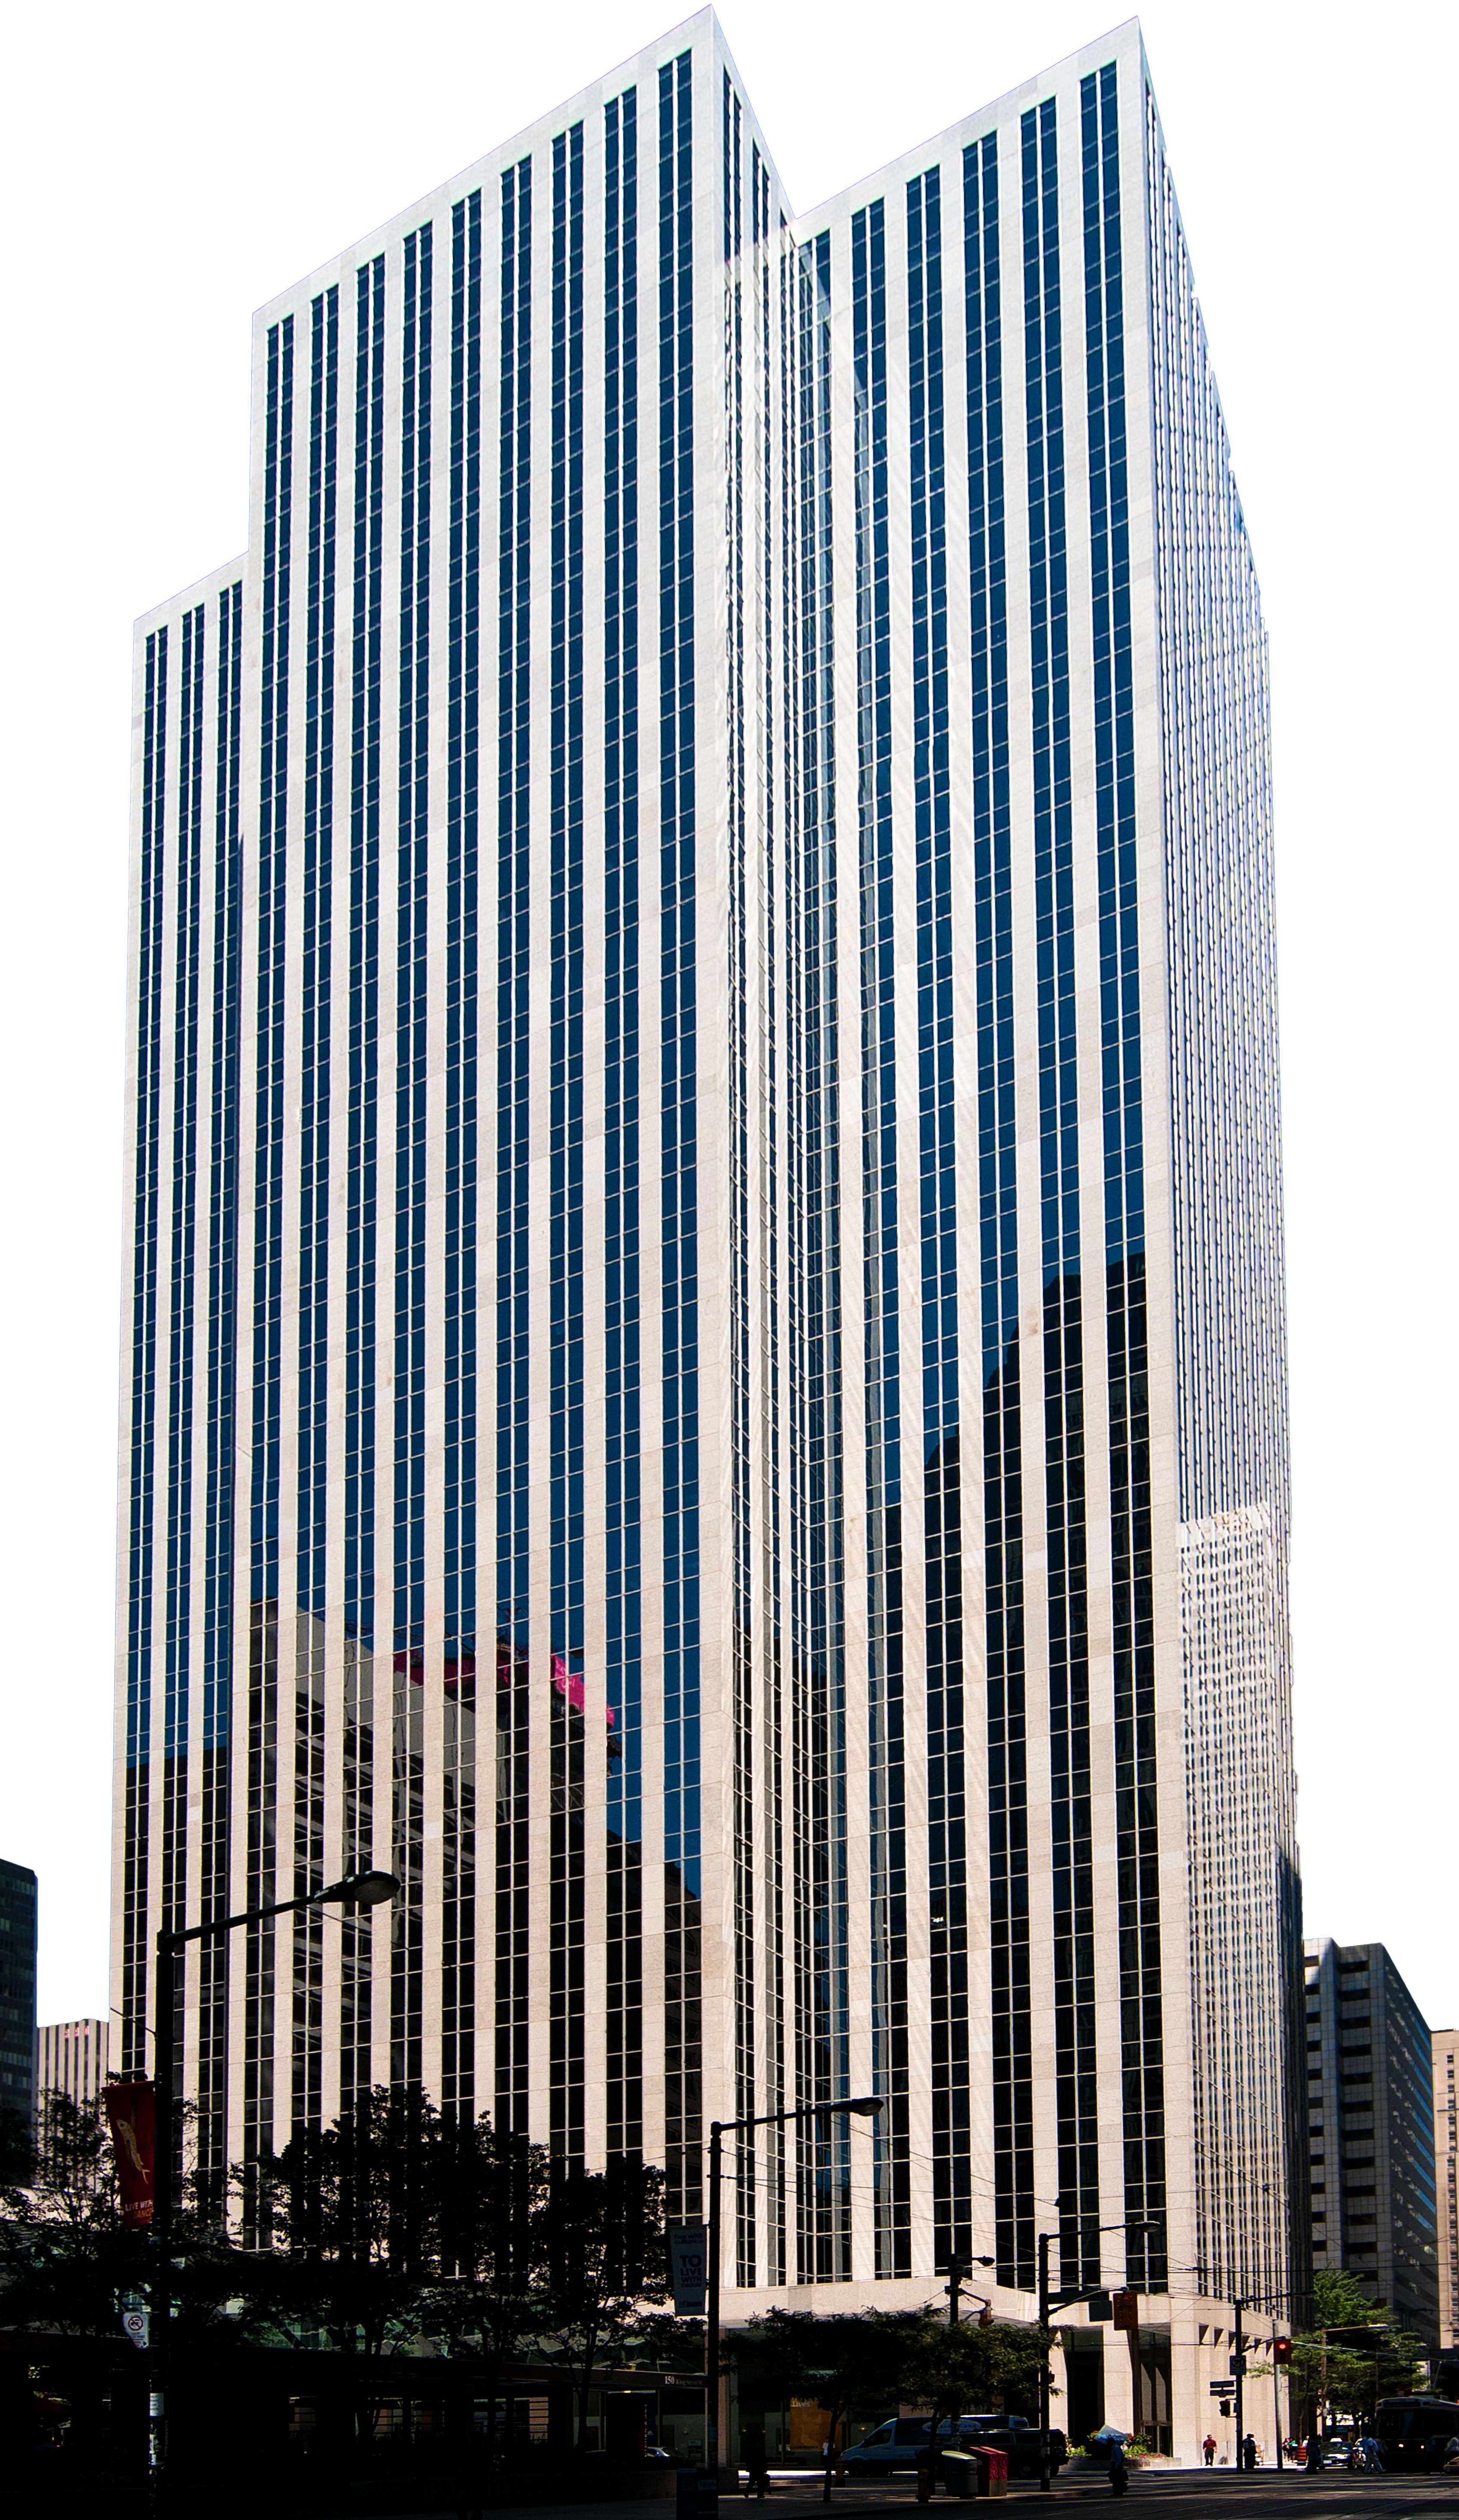 Hero image of Exchange Tower taken from the south west corner. Sky has been cropped out of the photograph so there is no background or distinctive light source.